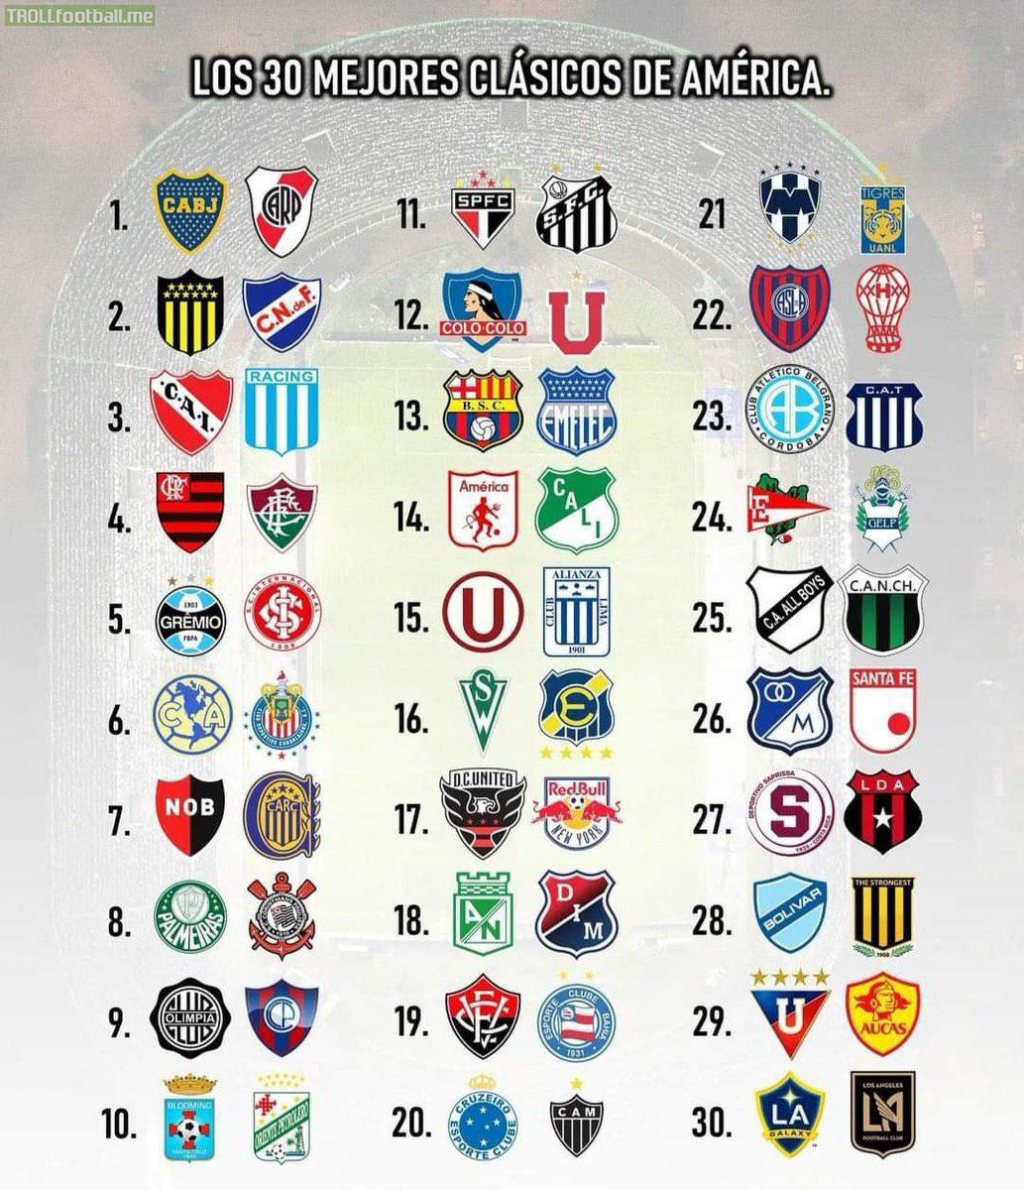 Chilean newspaper La Tercera listed their list of Top 30 football derbies of the Americas (Conmebol and Concacaf). Argentina, Brazil and Uruguay in the Top 5.